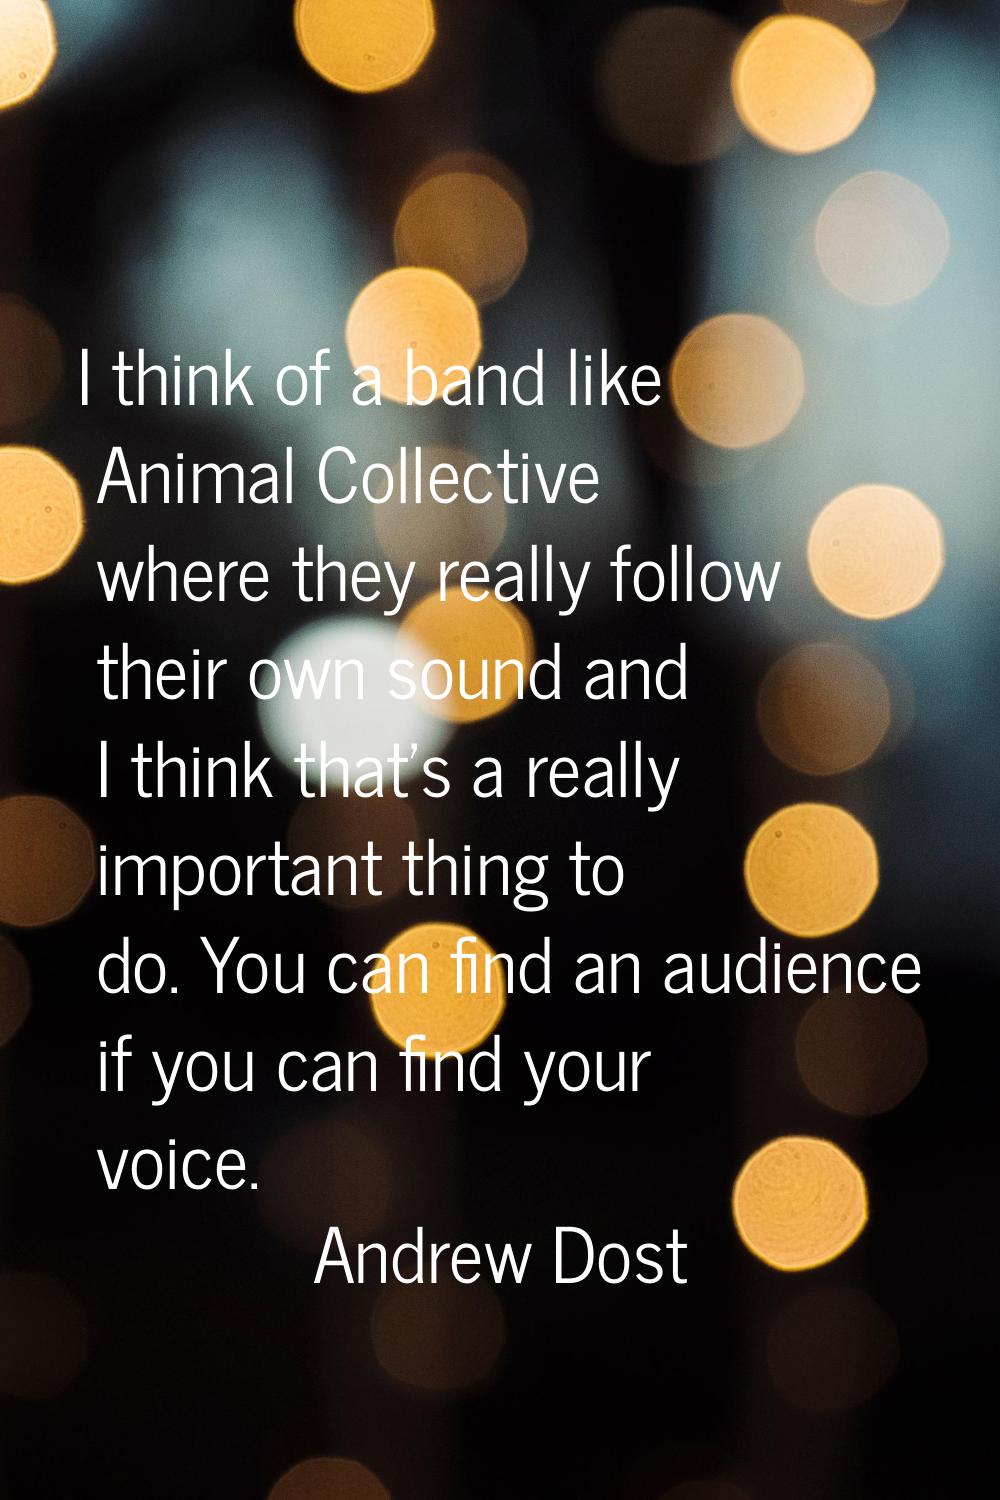 I think of a band like Animal Collective where they really follow their own sound and I think that'